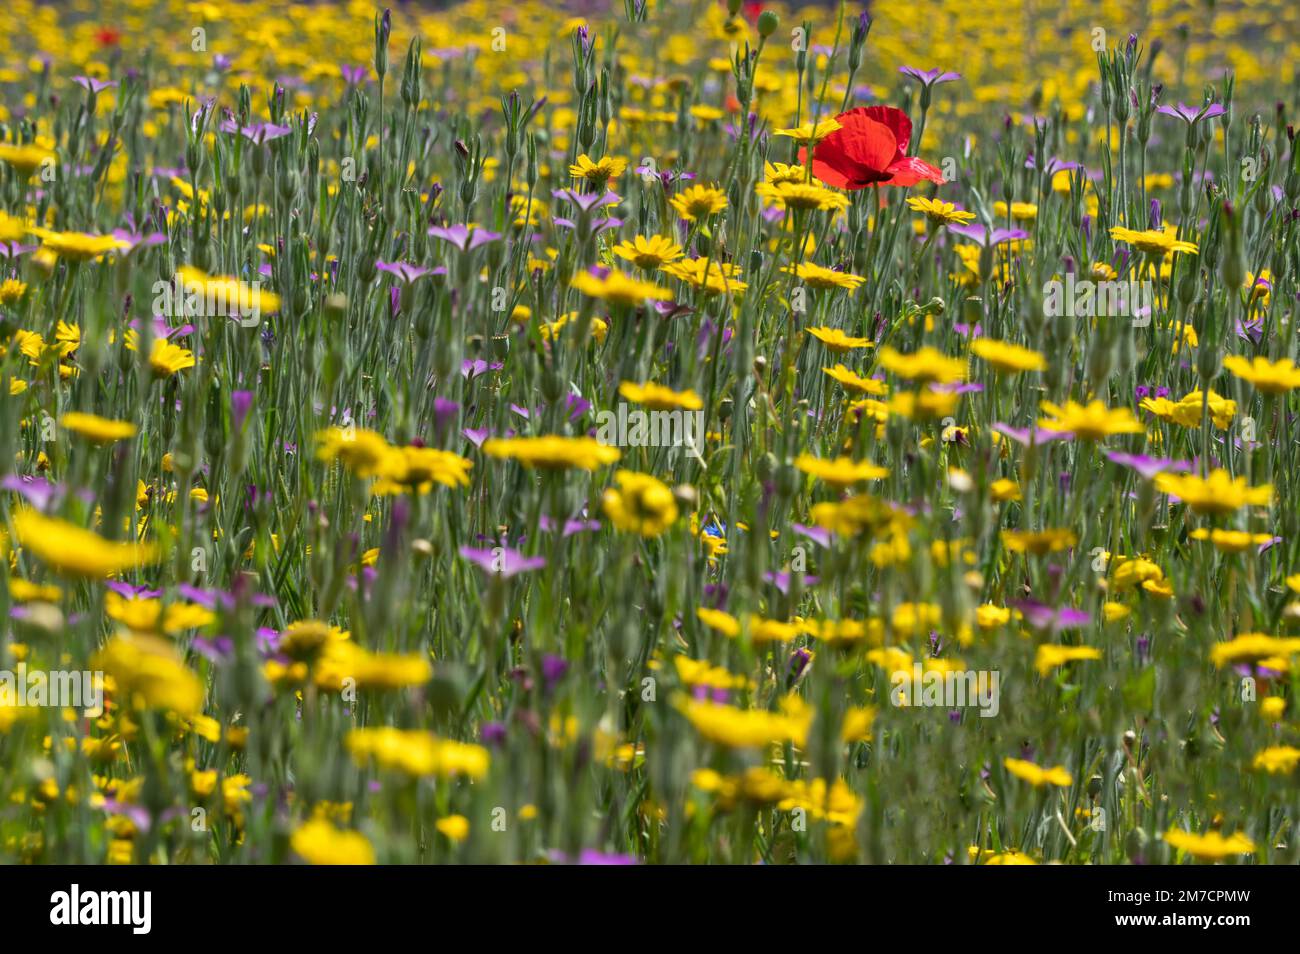 Poppy and Corn marigolds in a wildflower meadow in the Worcestershire UK countryside. July 2022 Stock Photo